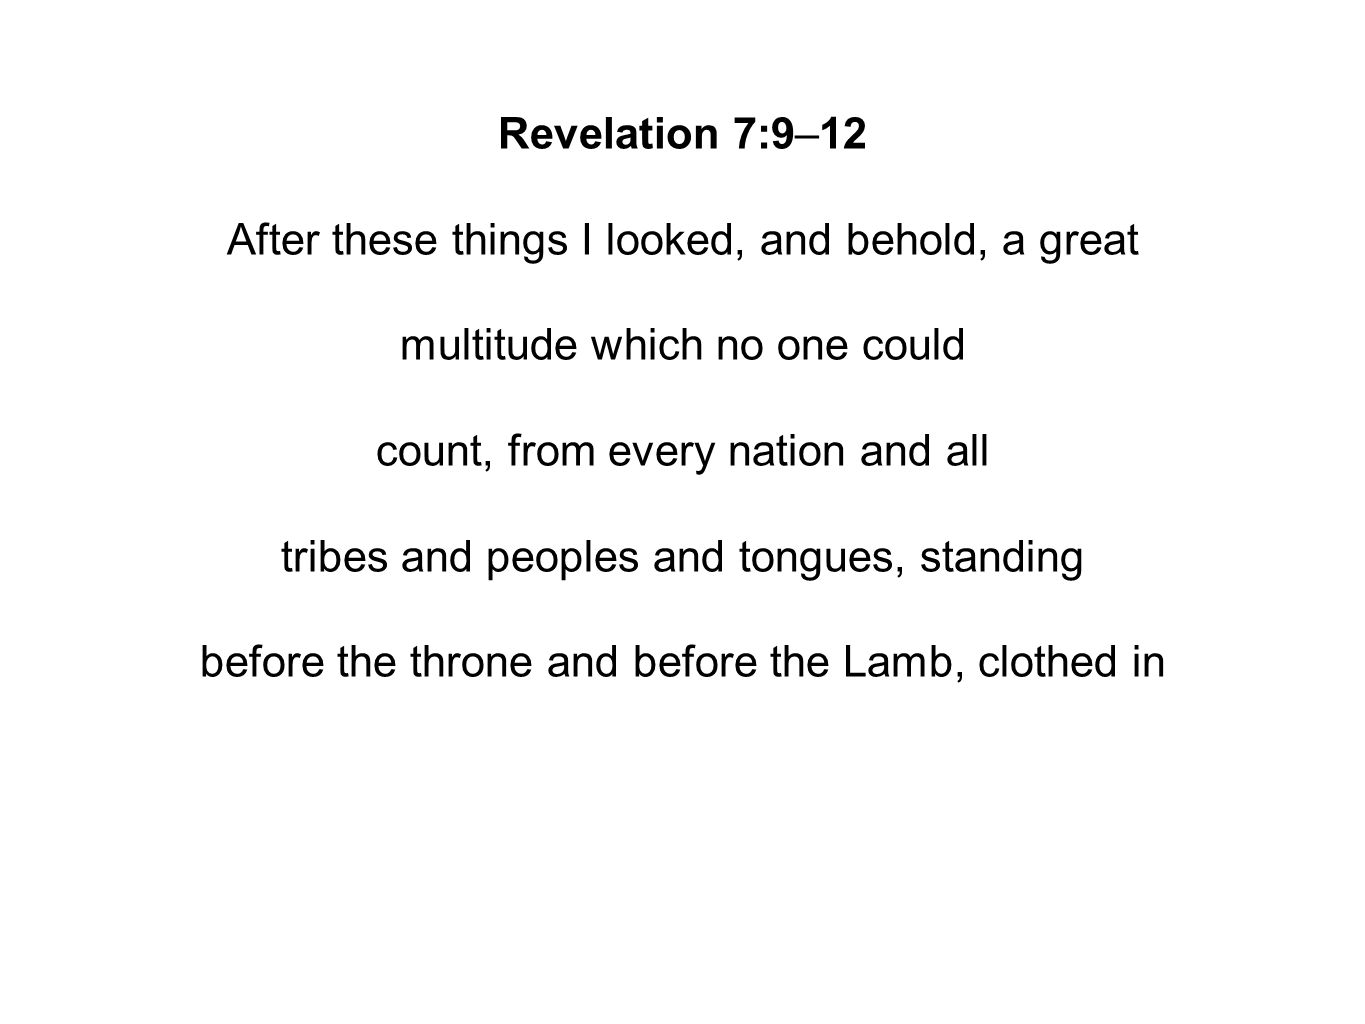 Revelation 7:9–12 After these things I looked, and behold, a great multitude which no one could count, from every nation and all tribes and peoples and tongues, standing before the throne and before the Lamb, clothed in